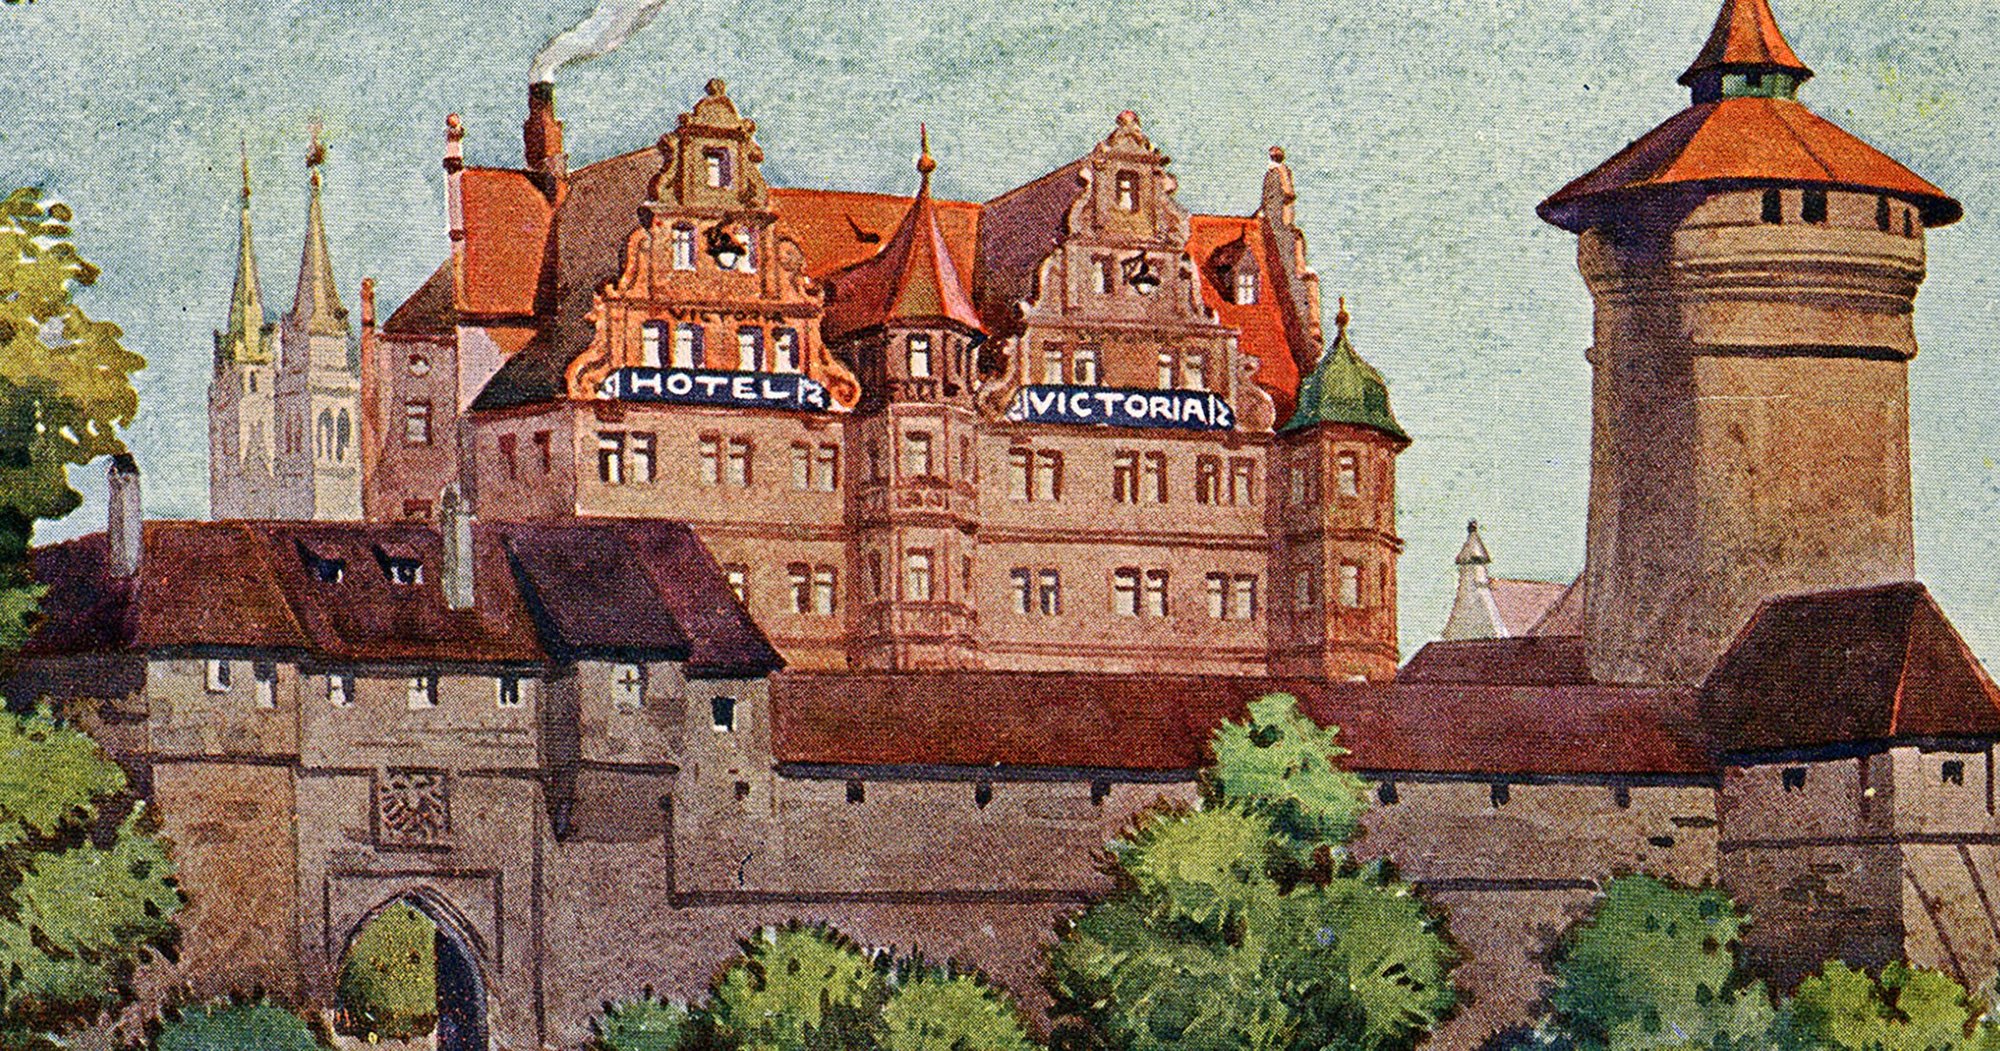 Detail of a historical postcard motif of the Hotel VICTORIA